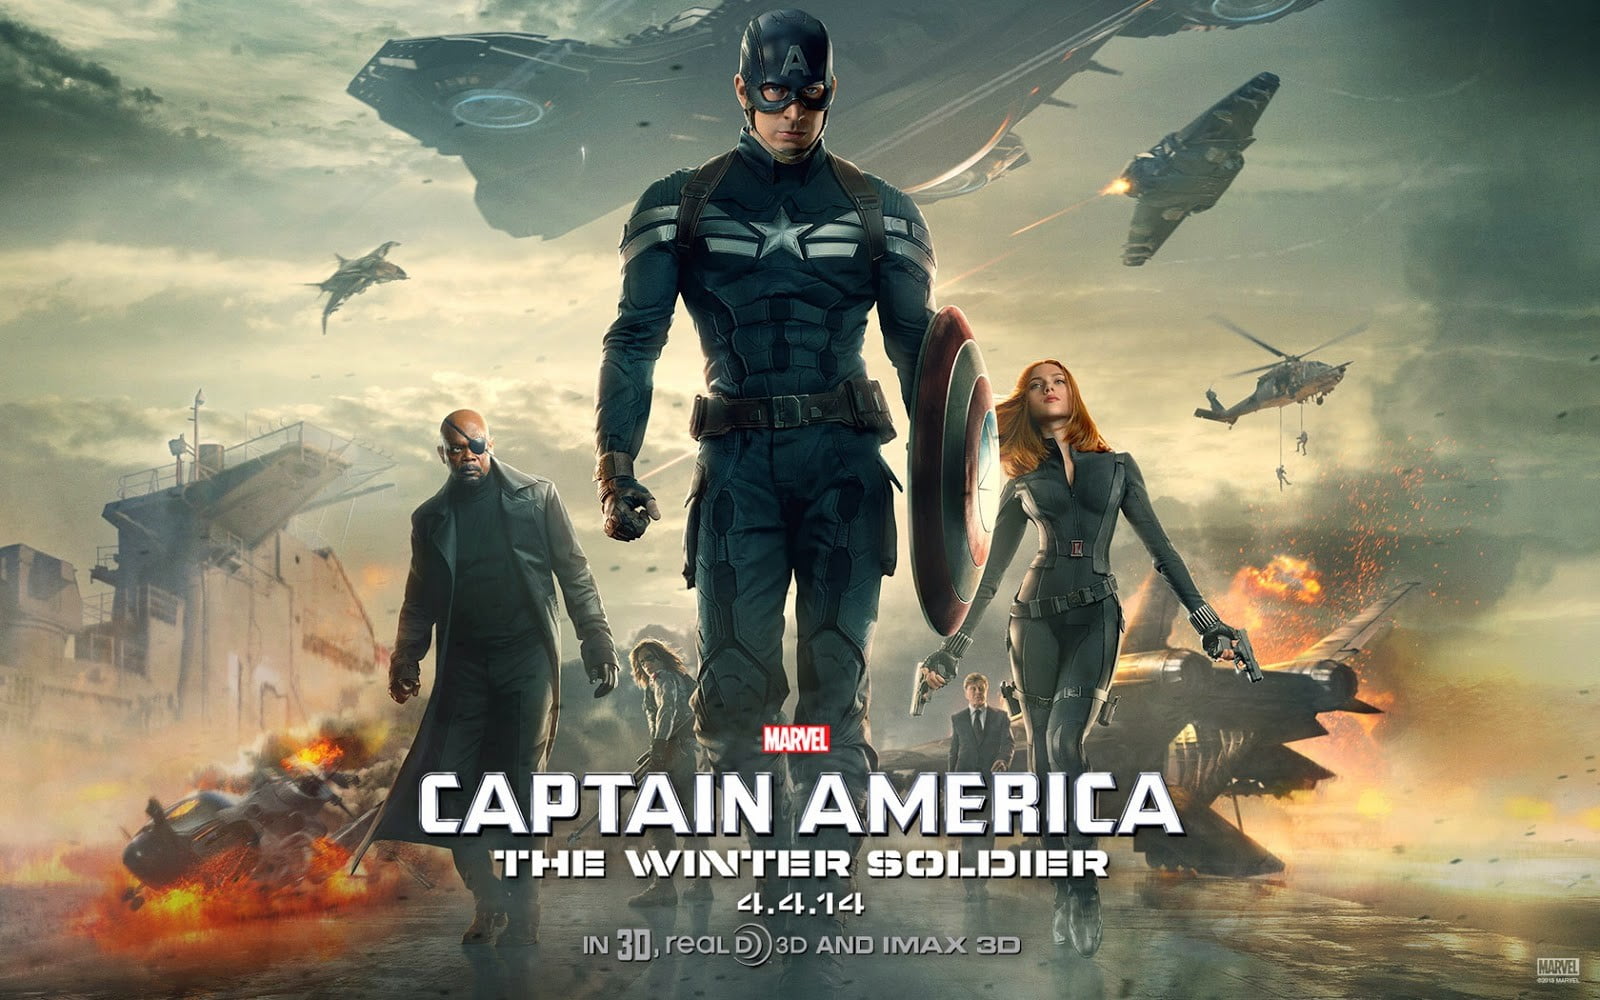 Marvel Captain America The Winter Soldier poster, Captain America: The Winter Soldier